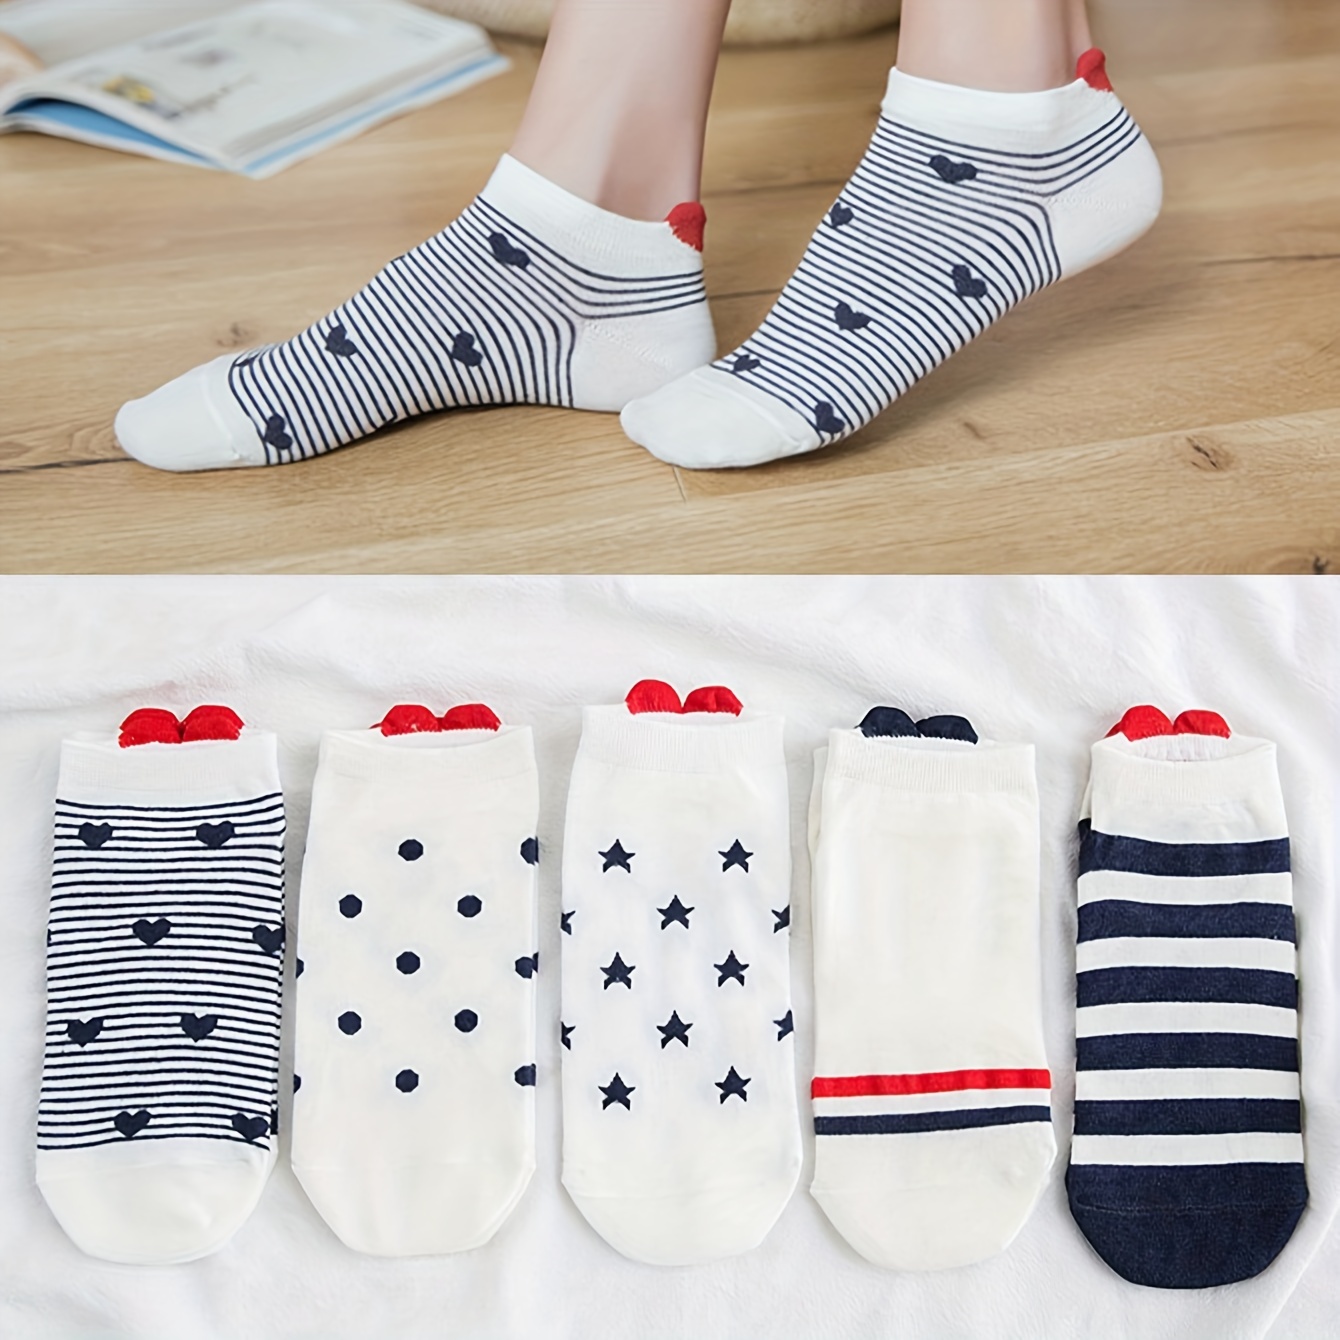 

5 Pairs Cute Love Heart Pattern Invisible Socks, Comfy & Breathable Short Socks, Women's Stockings & Hosiery